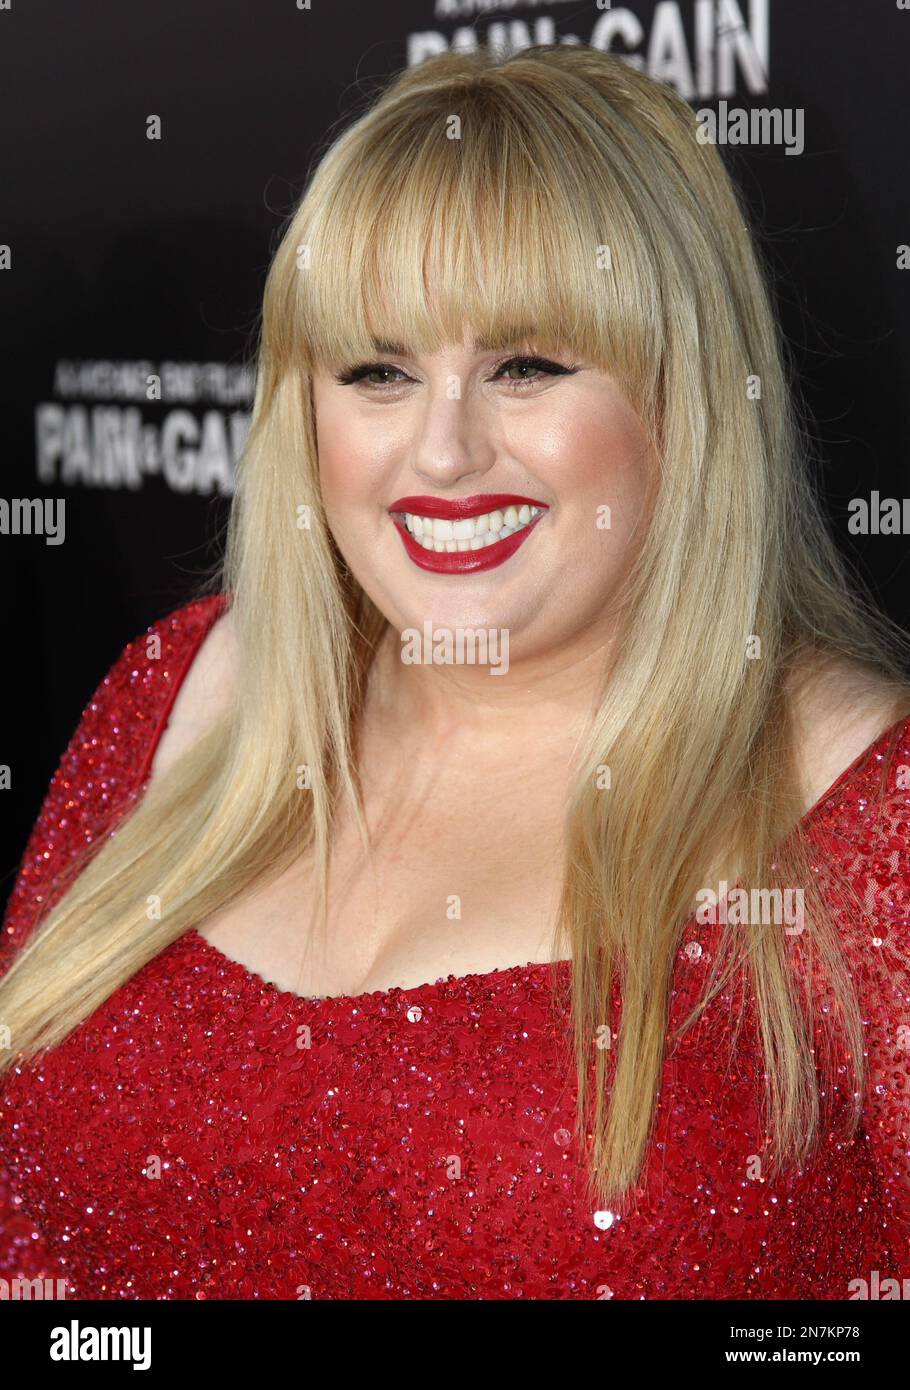 Actress Rebel Wilson arrives at the LA Premiere of 